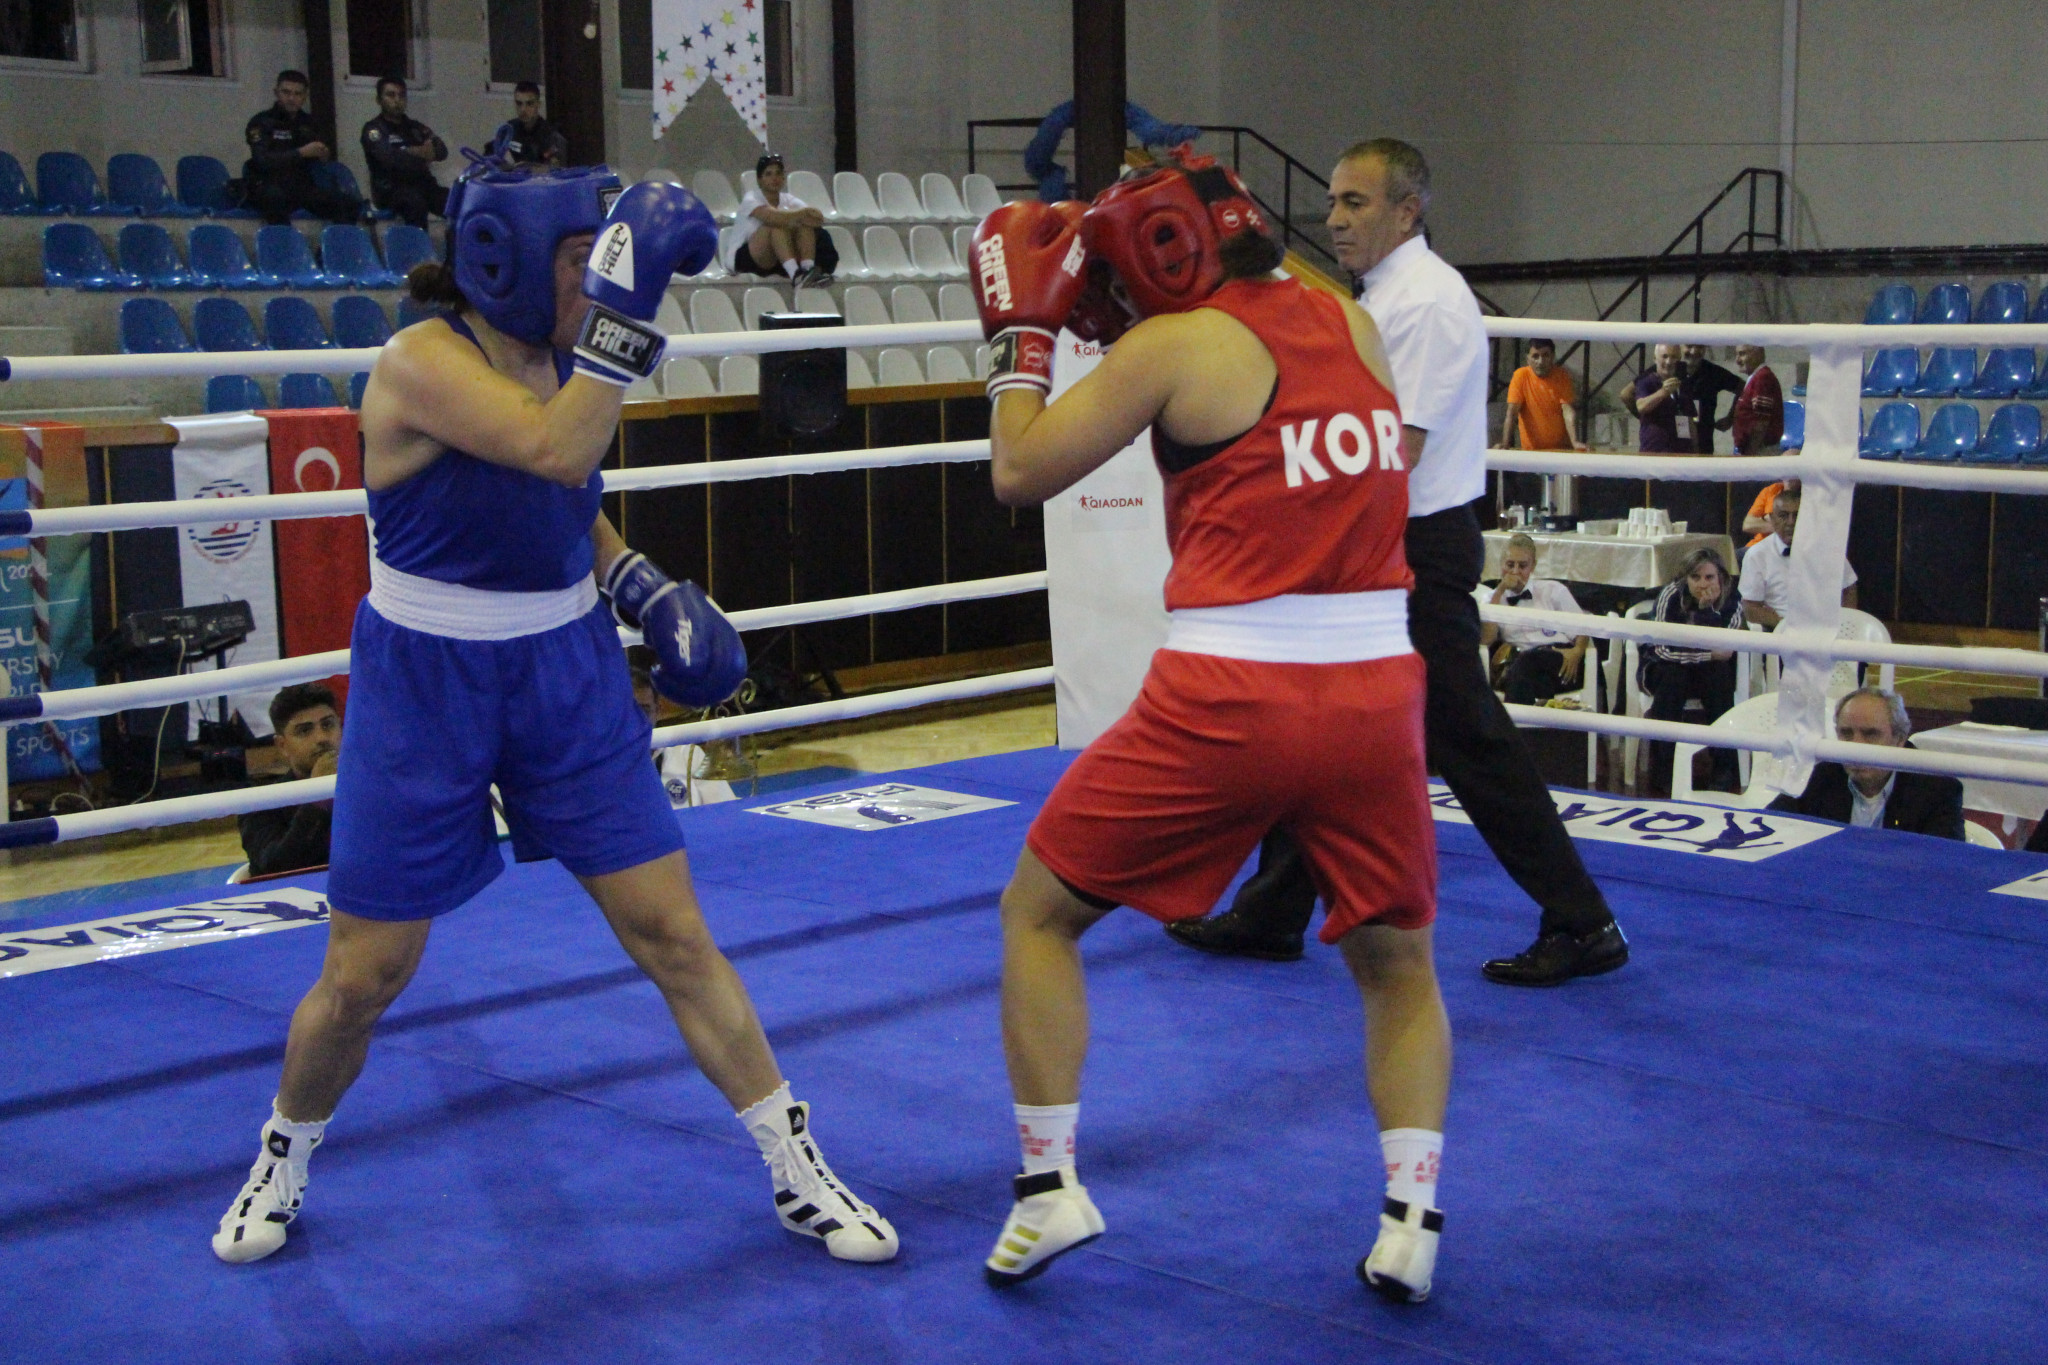 Boxing preliminaries continued today on the university campus ©FISU